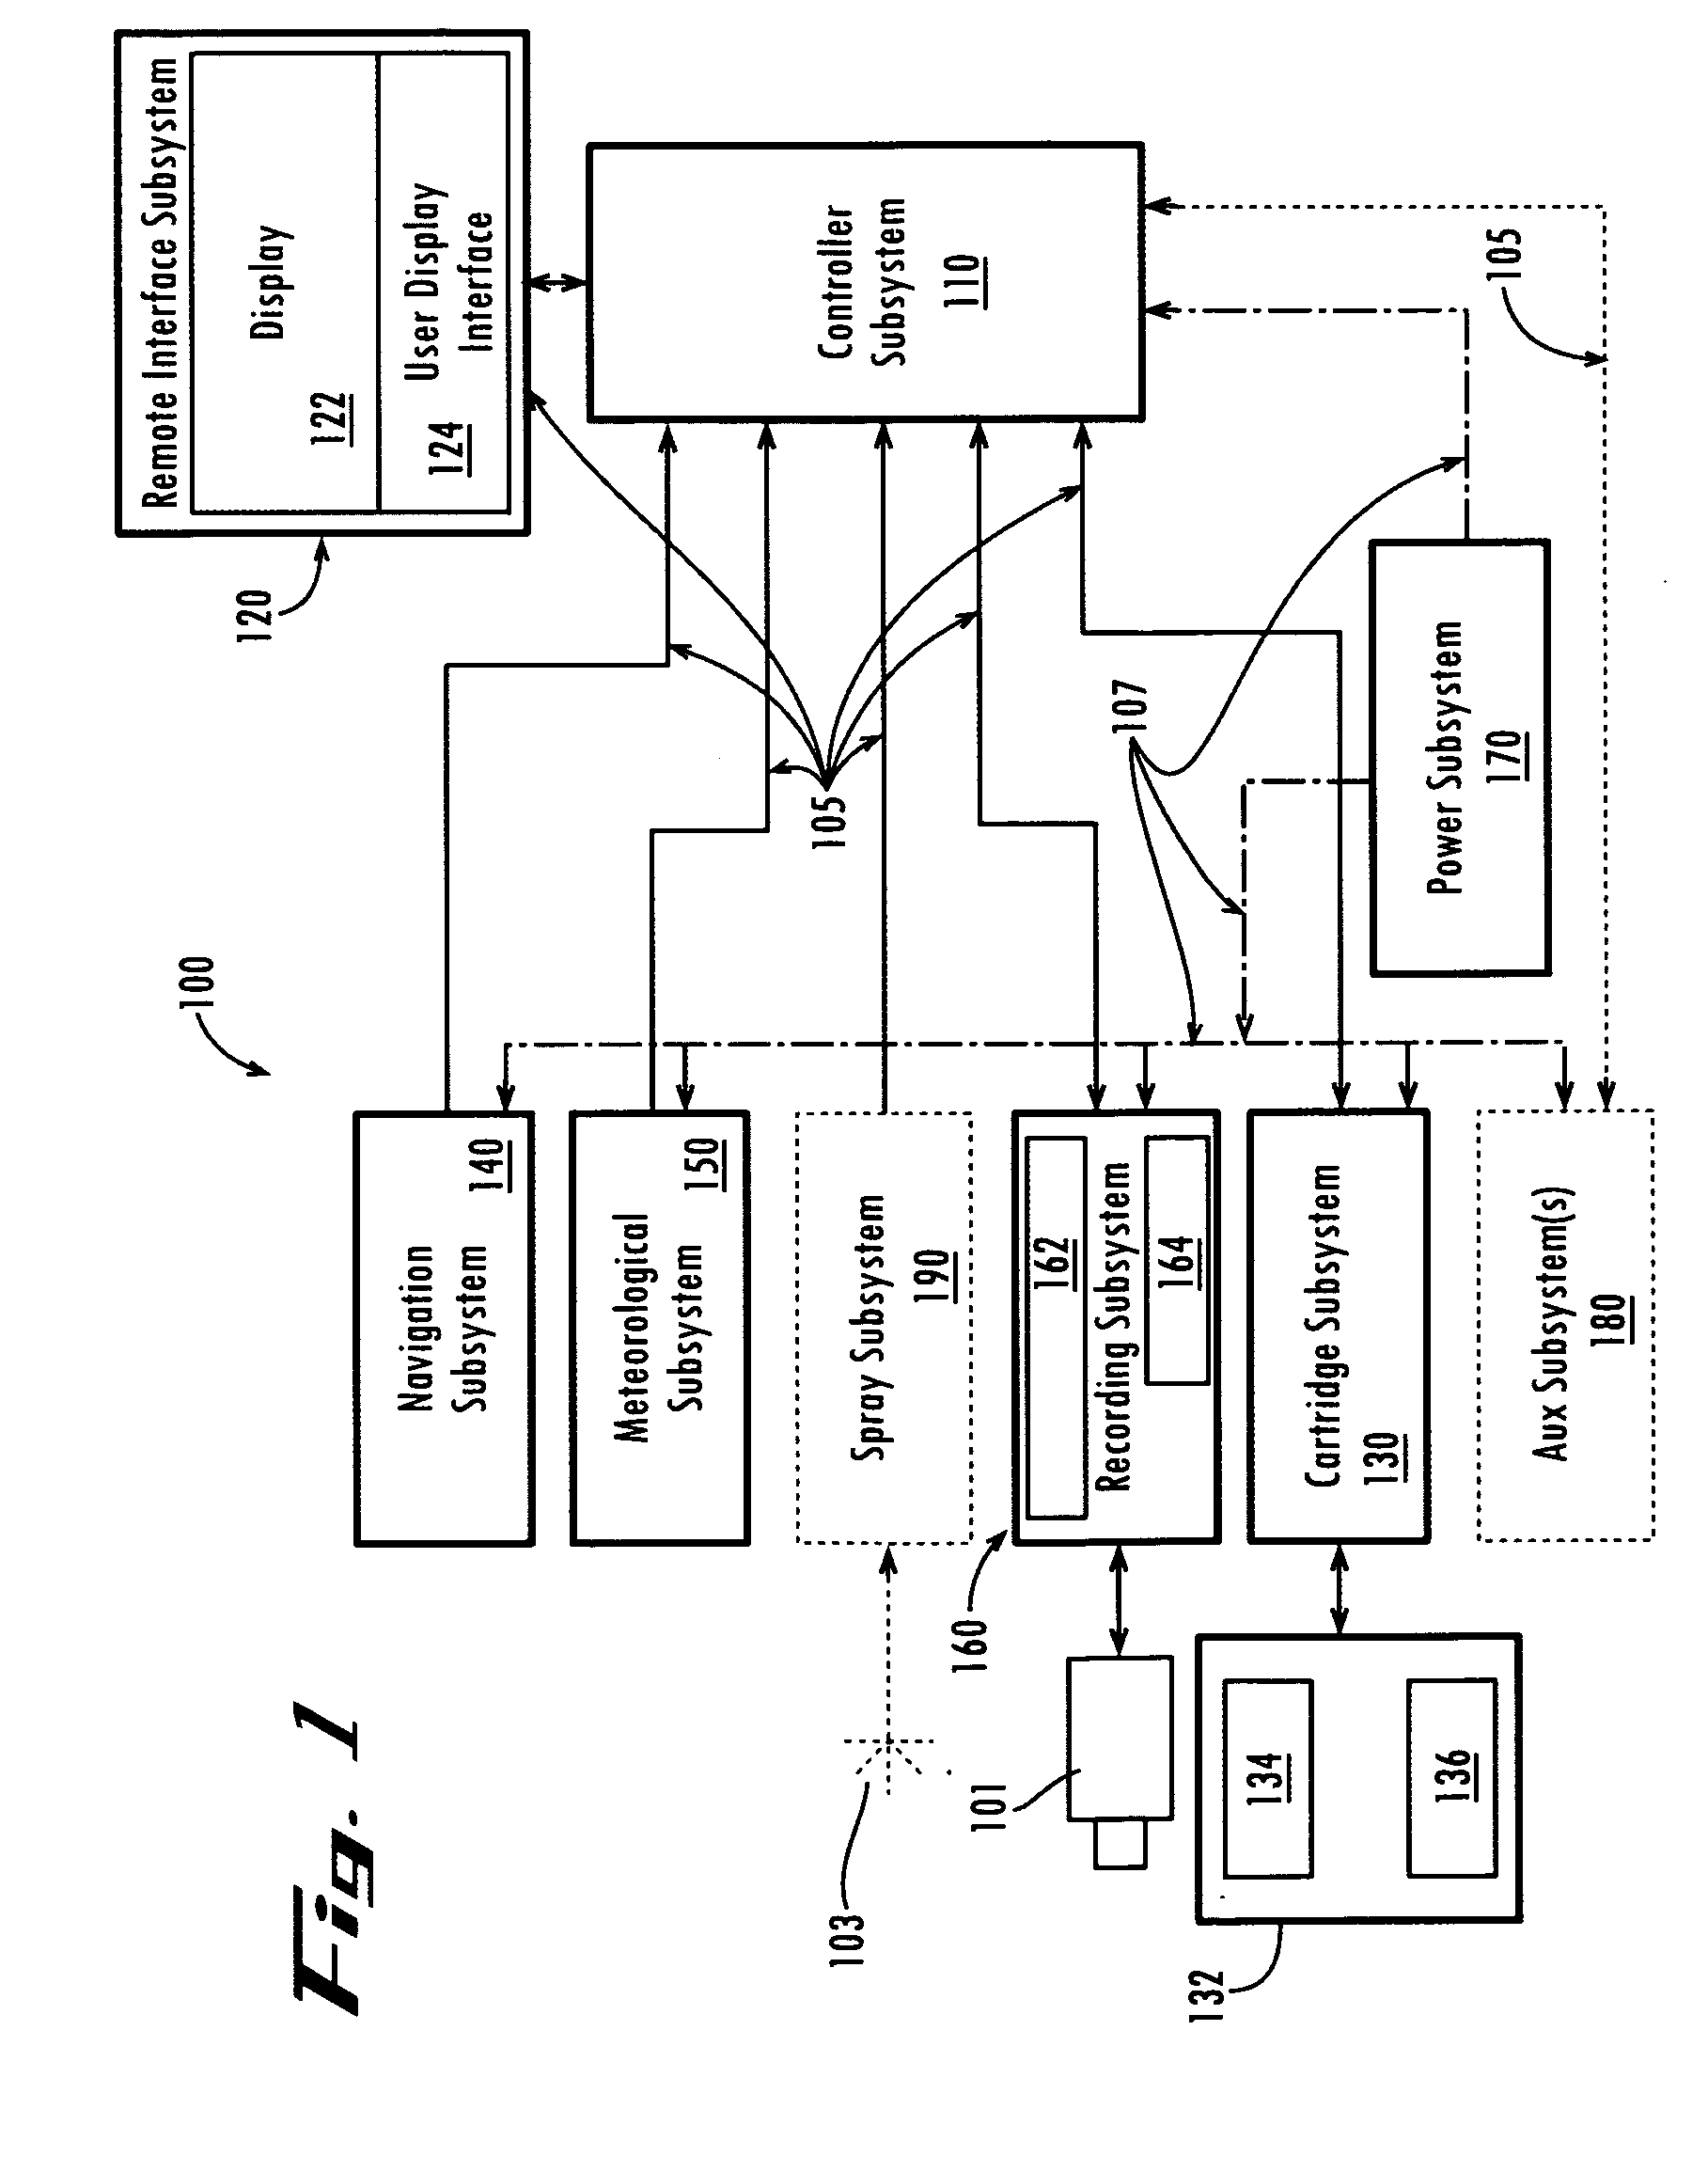 Cartridge ejection and data acquisition system